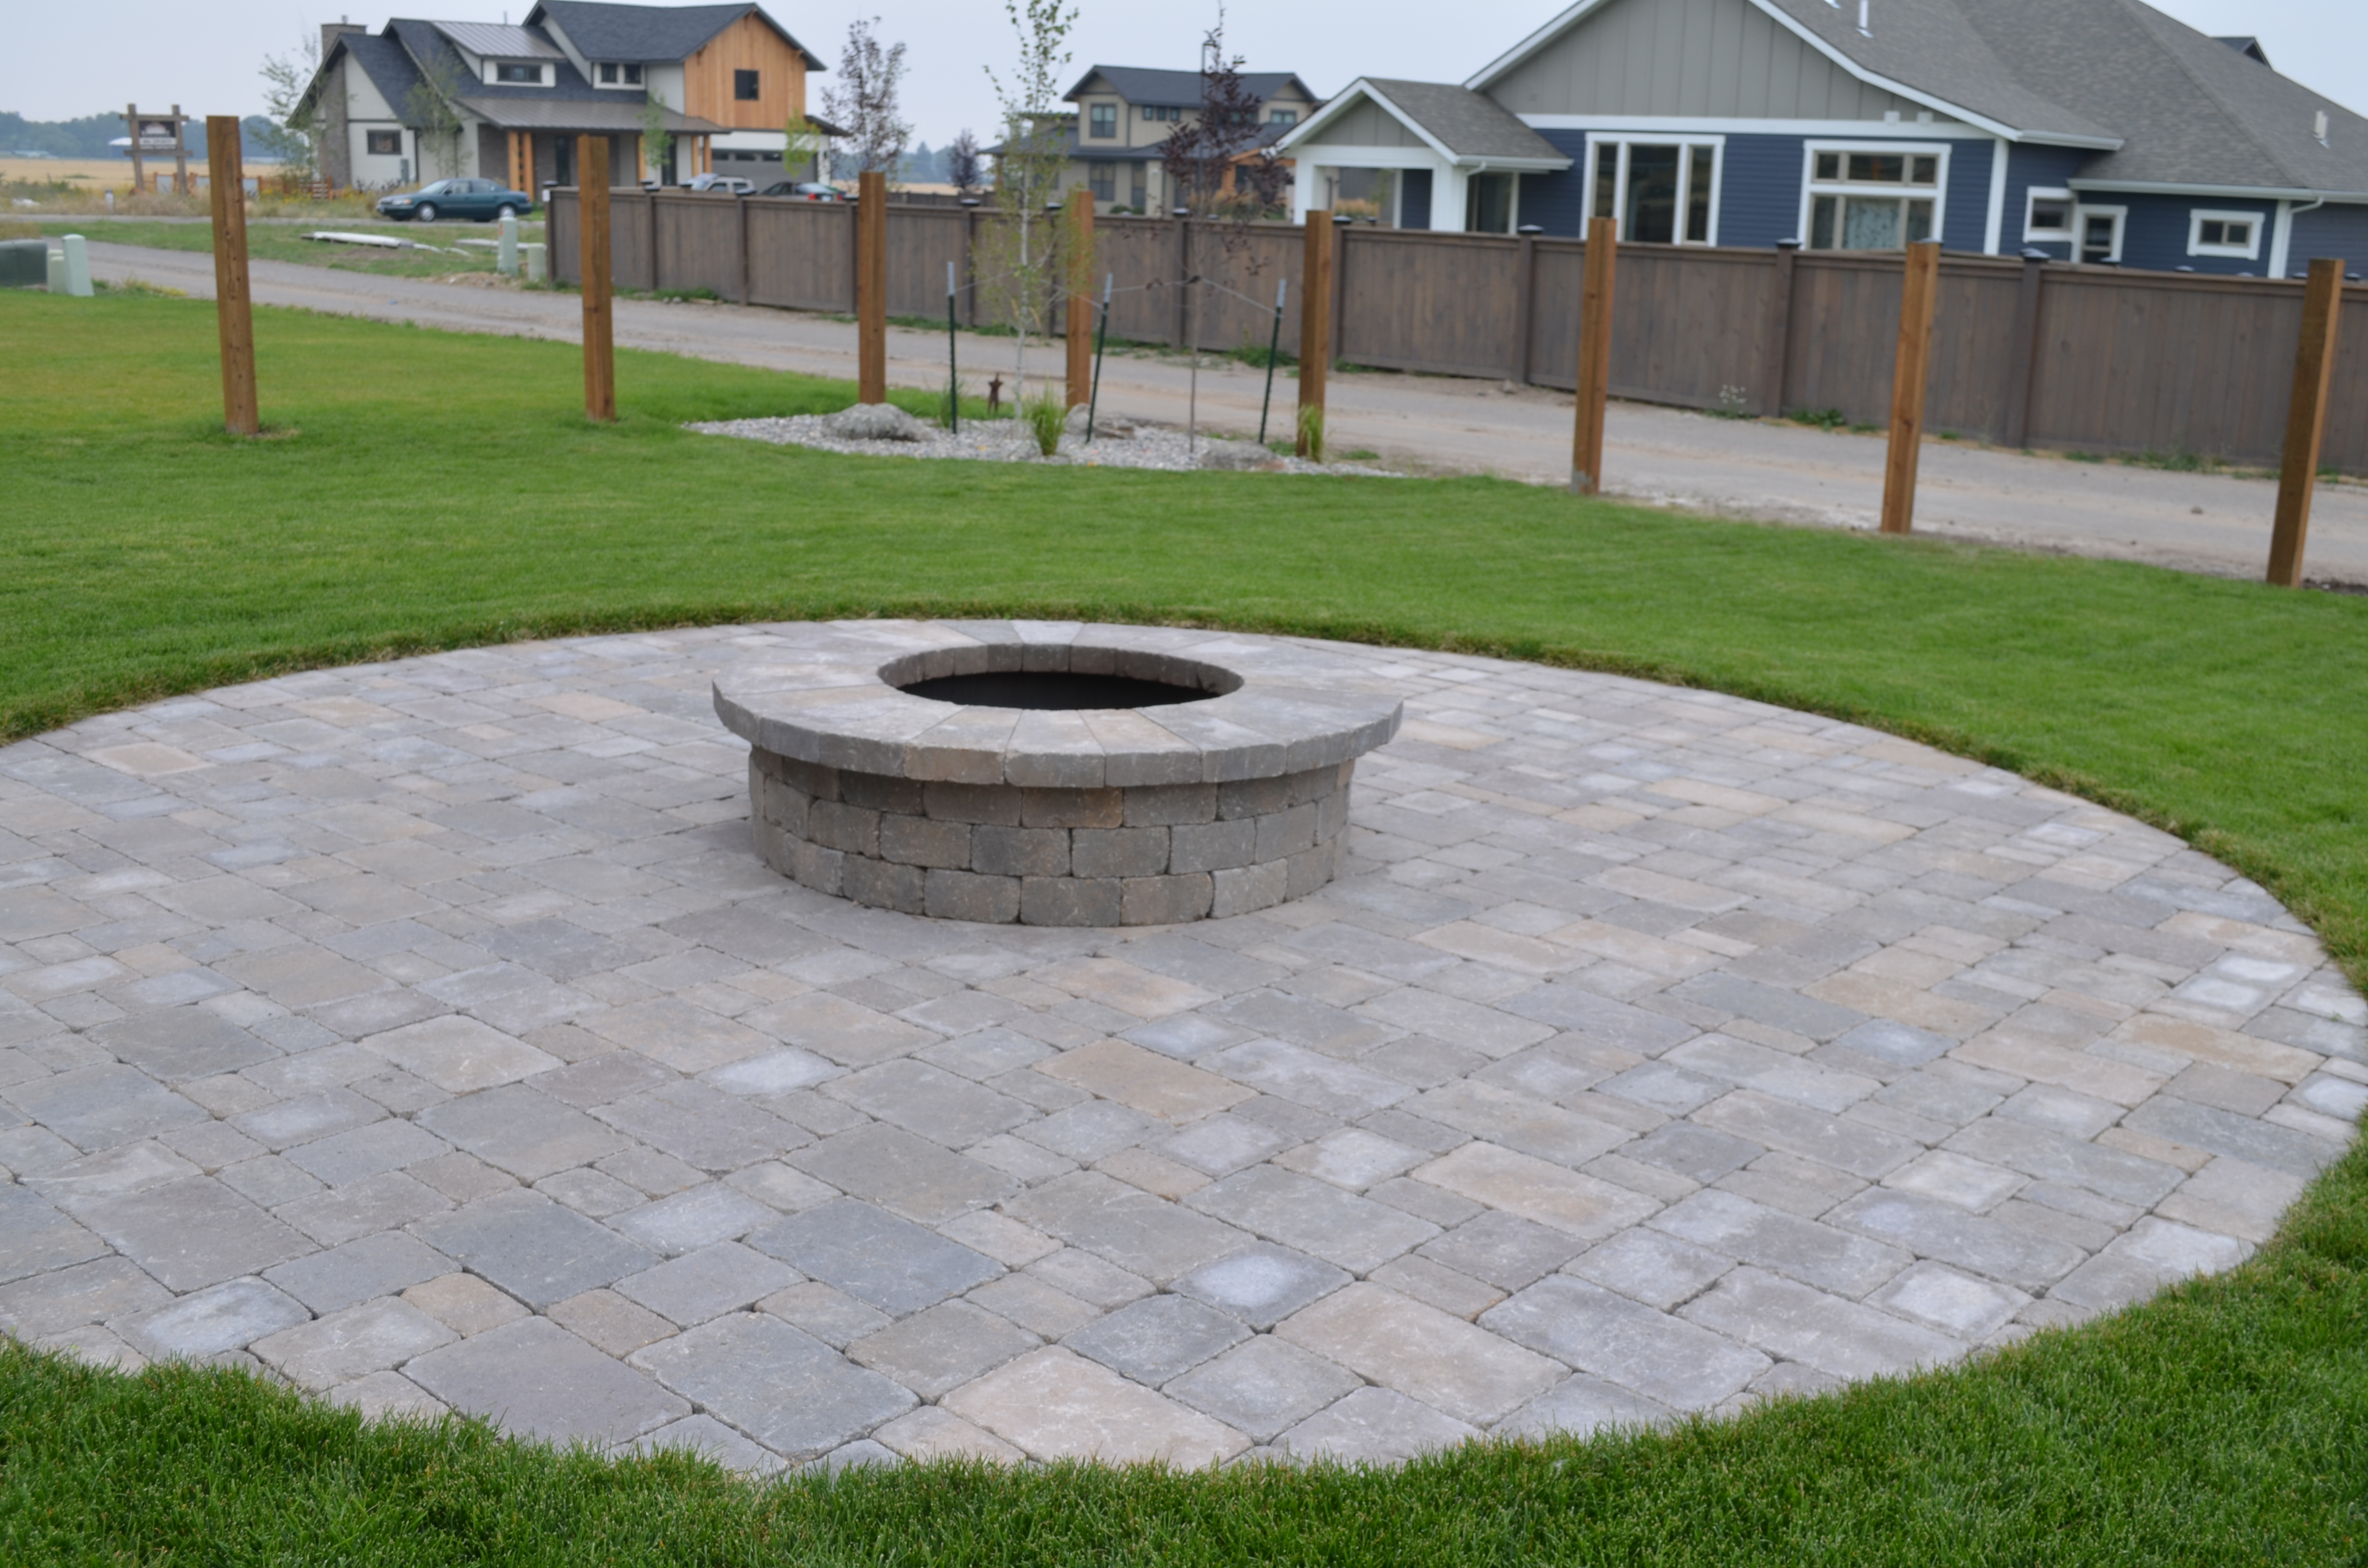 Fire pit, patio and walkway made of pavers. Full landscape installation as well.